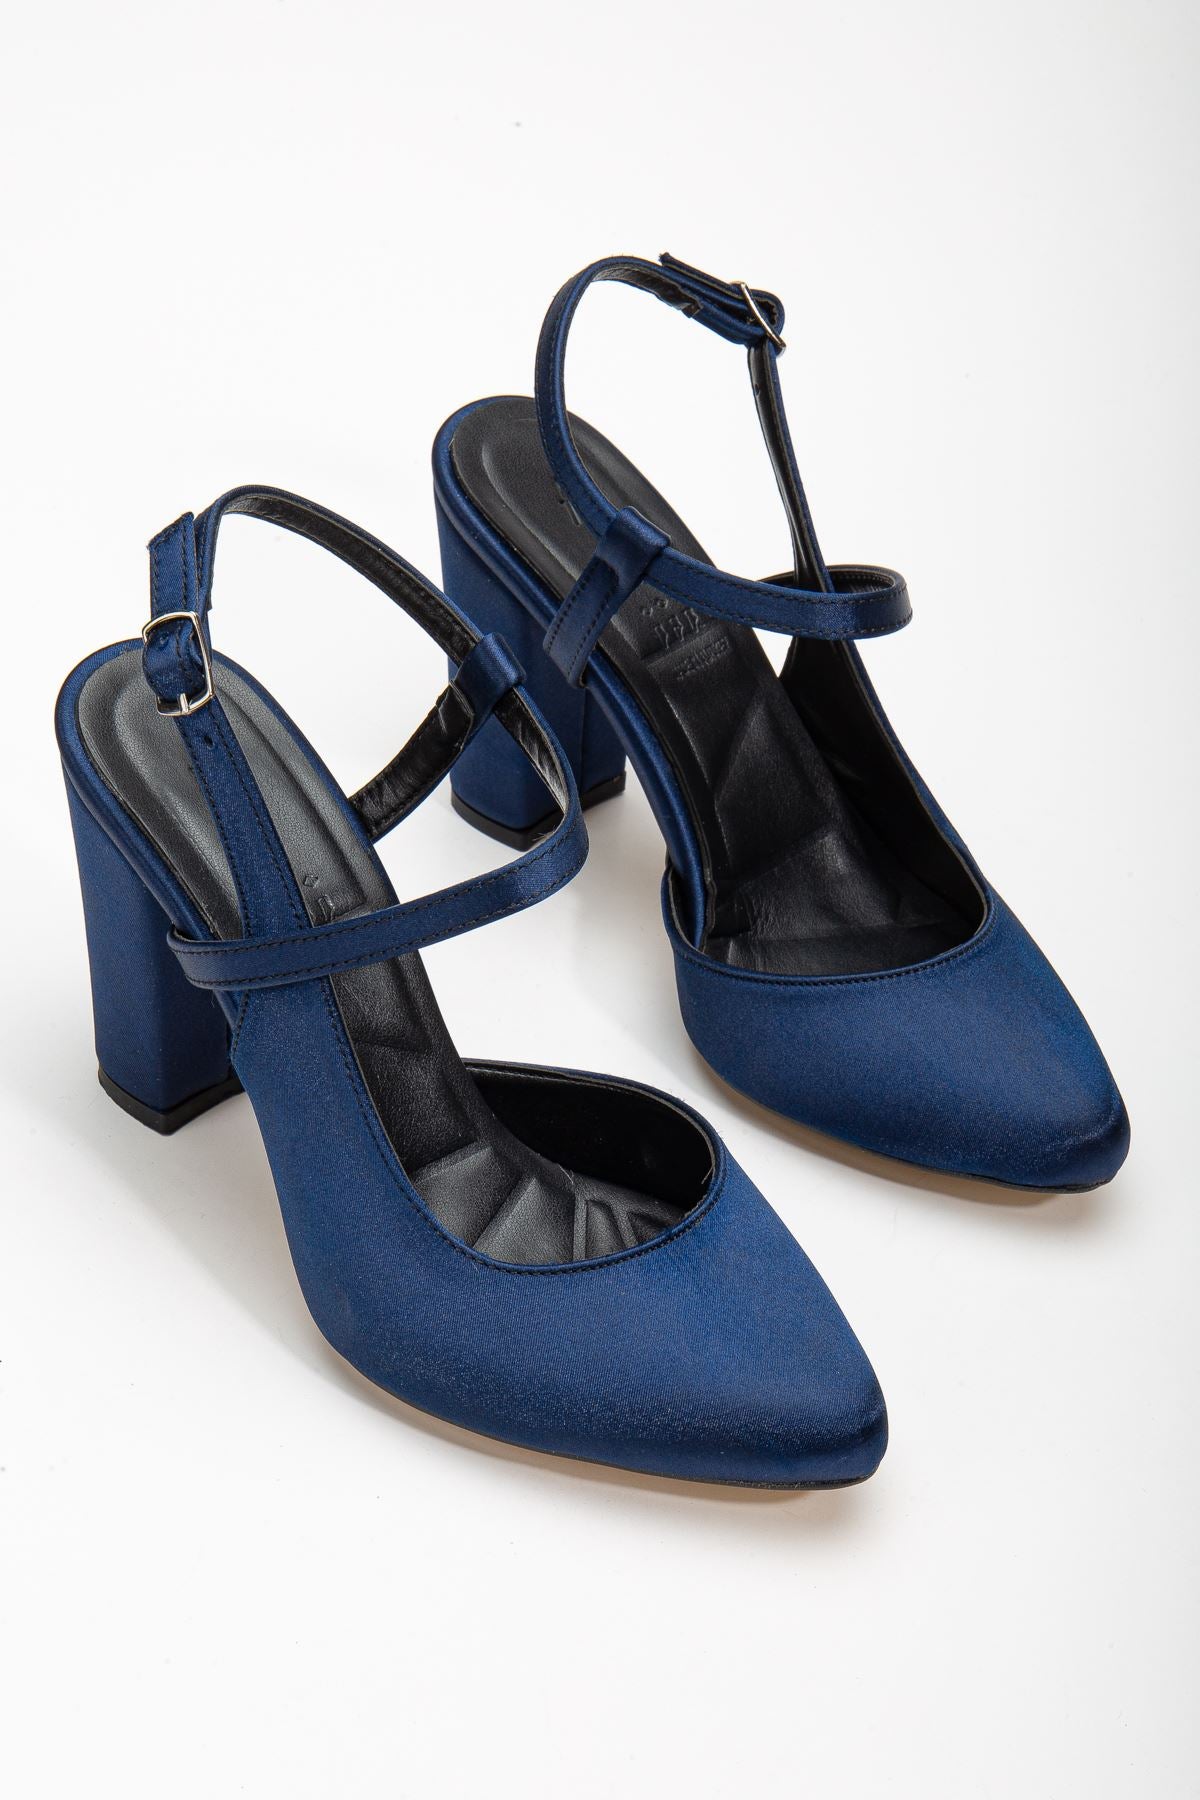 Lotus Navy Blue Satin Ankle Strap Heeled Women's Shoes - STREETMODE™